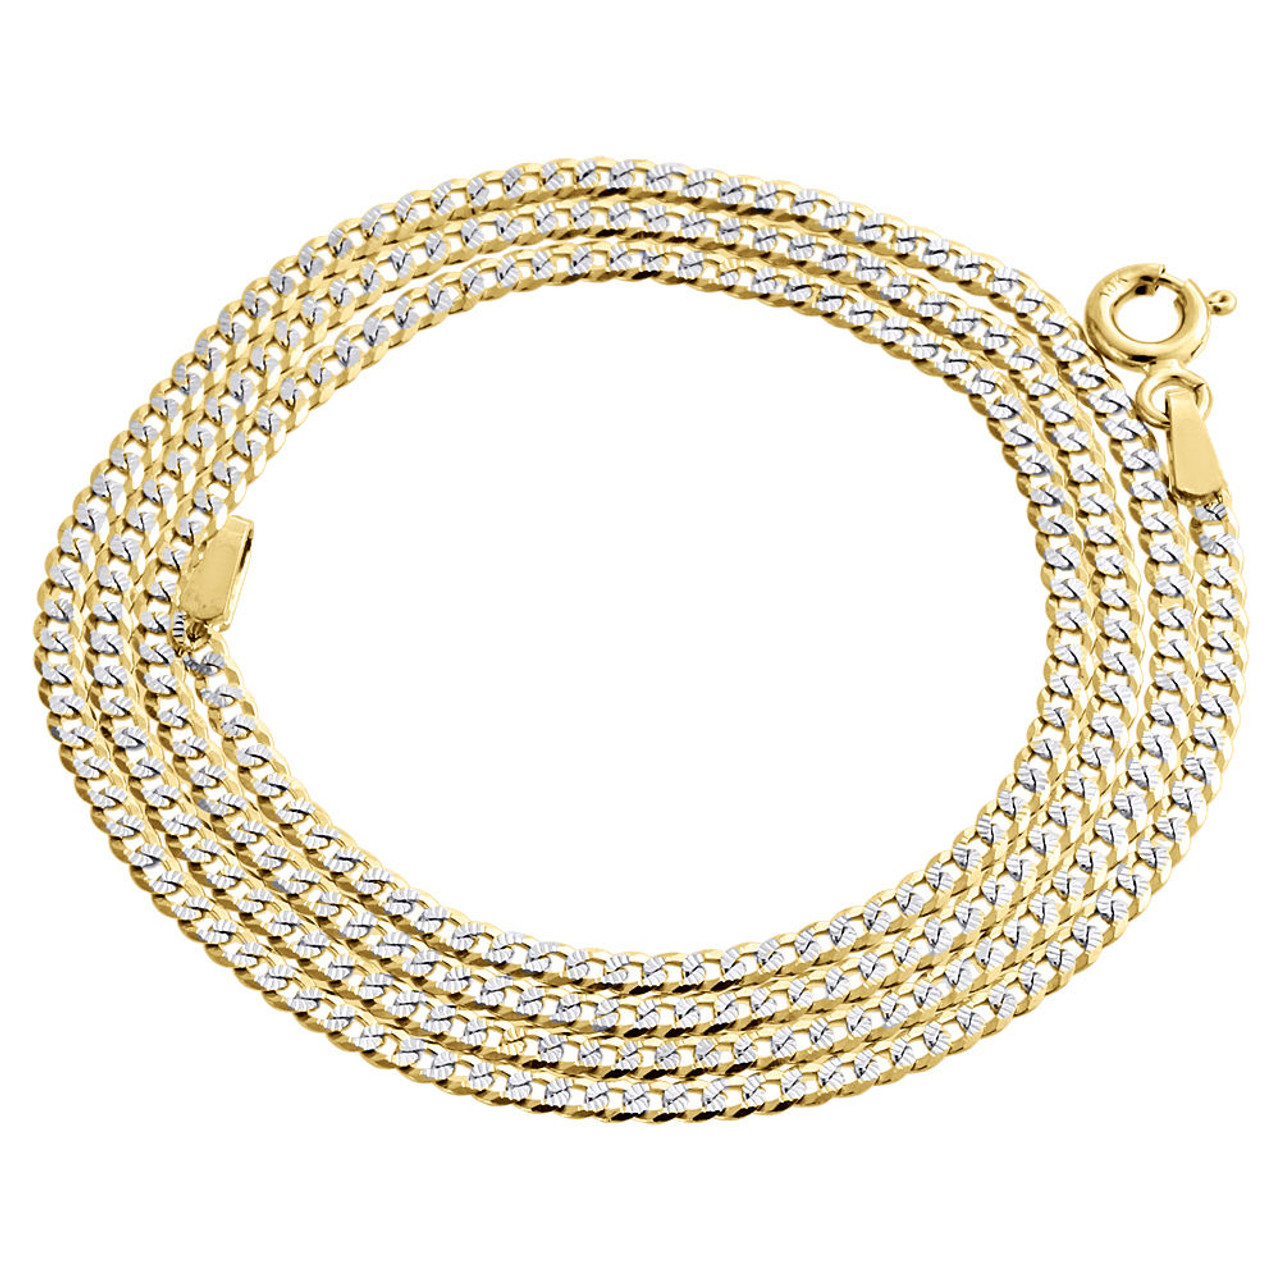 Real 10K Yellow Gold Solid Diamond Cut Cuban Link Chain 2mm Necklace 16-24 Inches